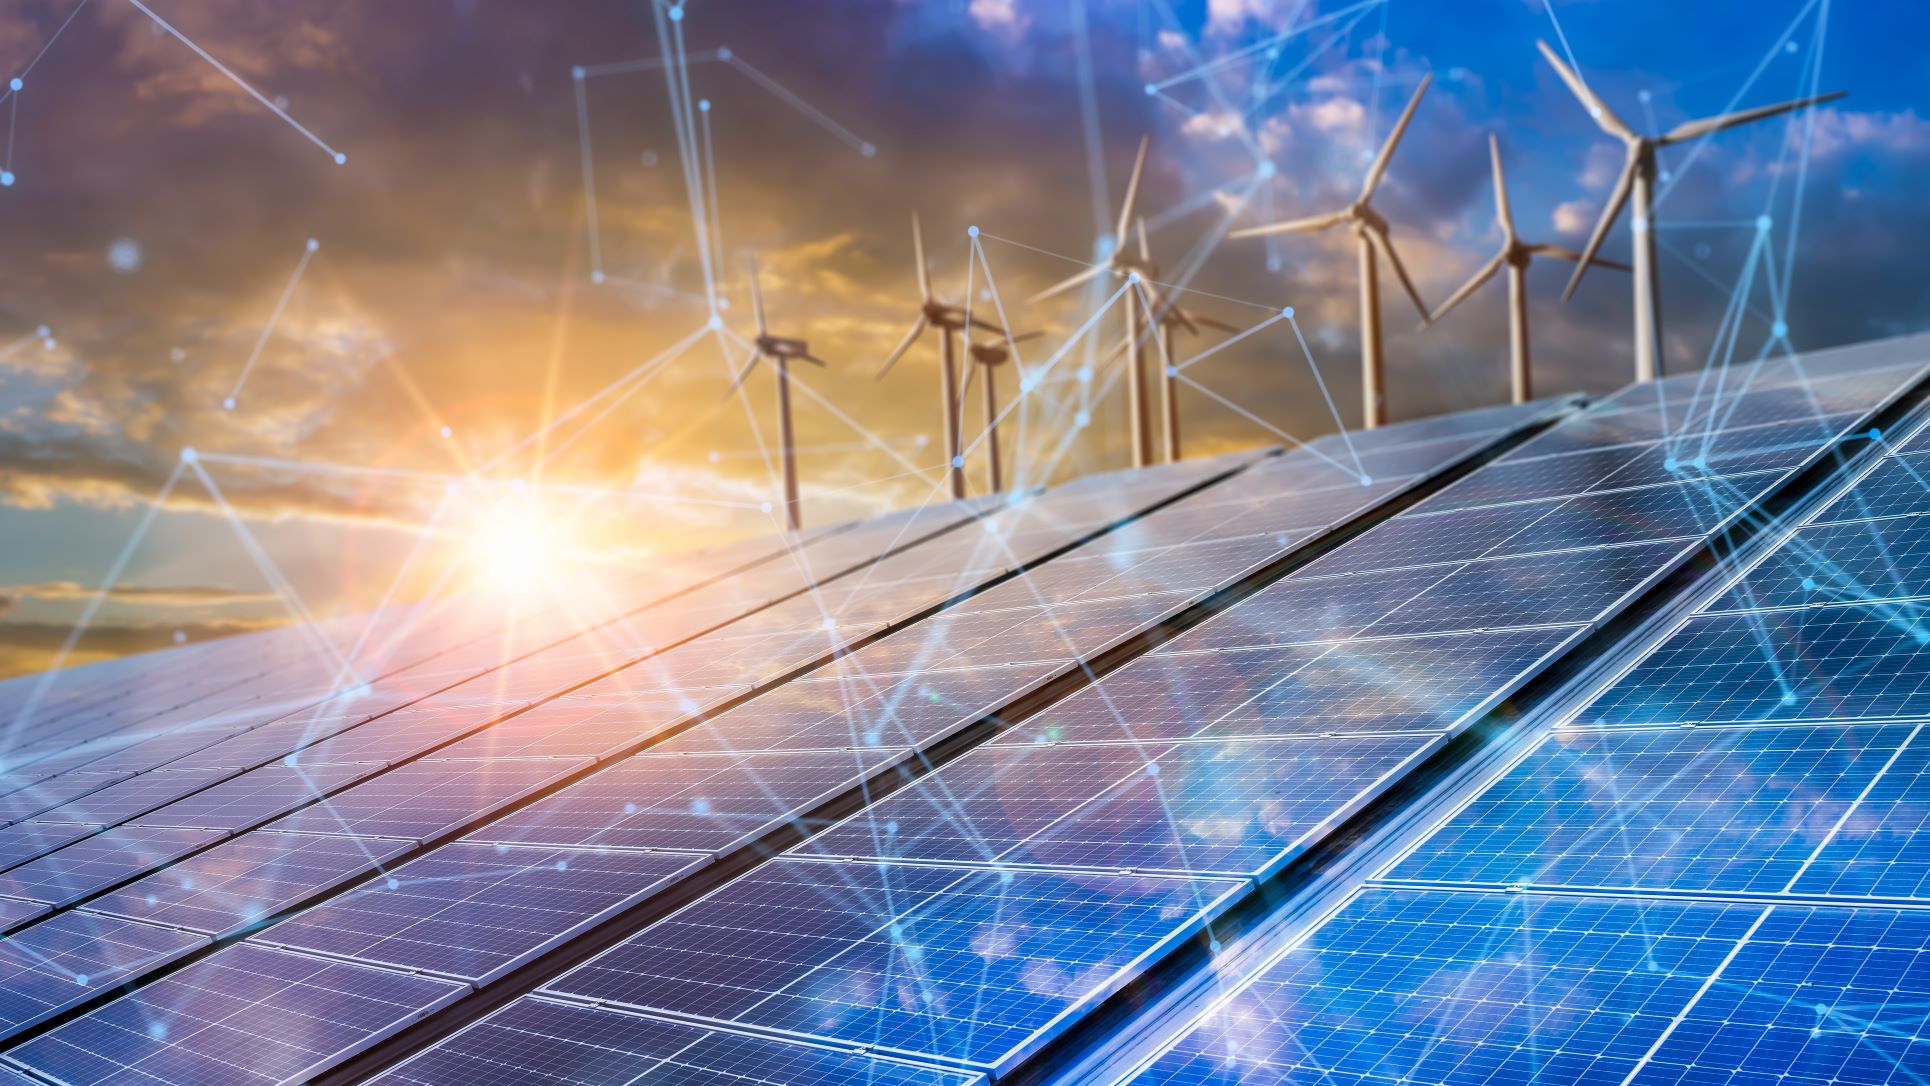 Digital Transformation in Renewable Energy: How Technological Advancements Will Support the Transition to Cleaner Energy